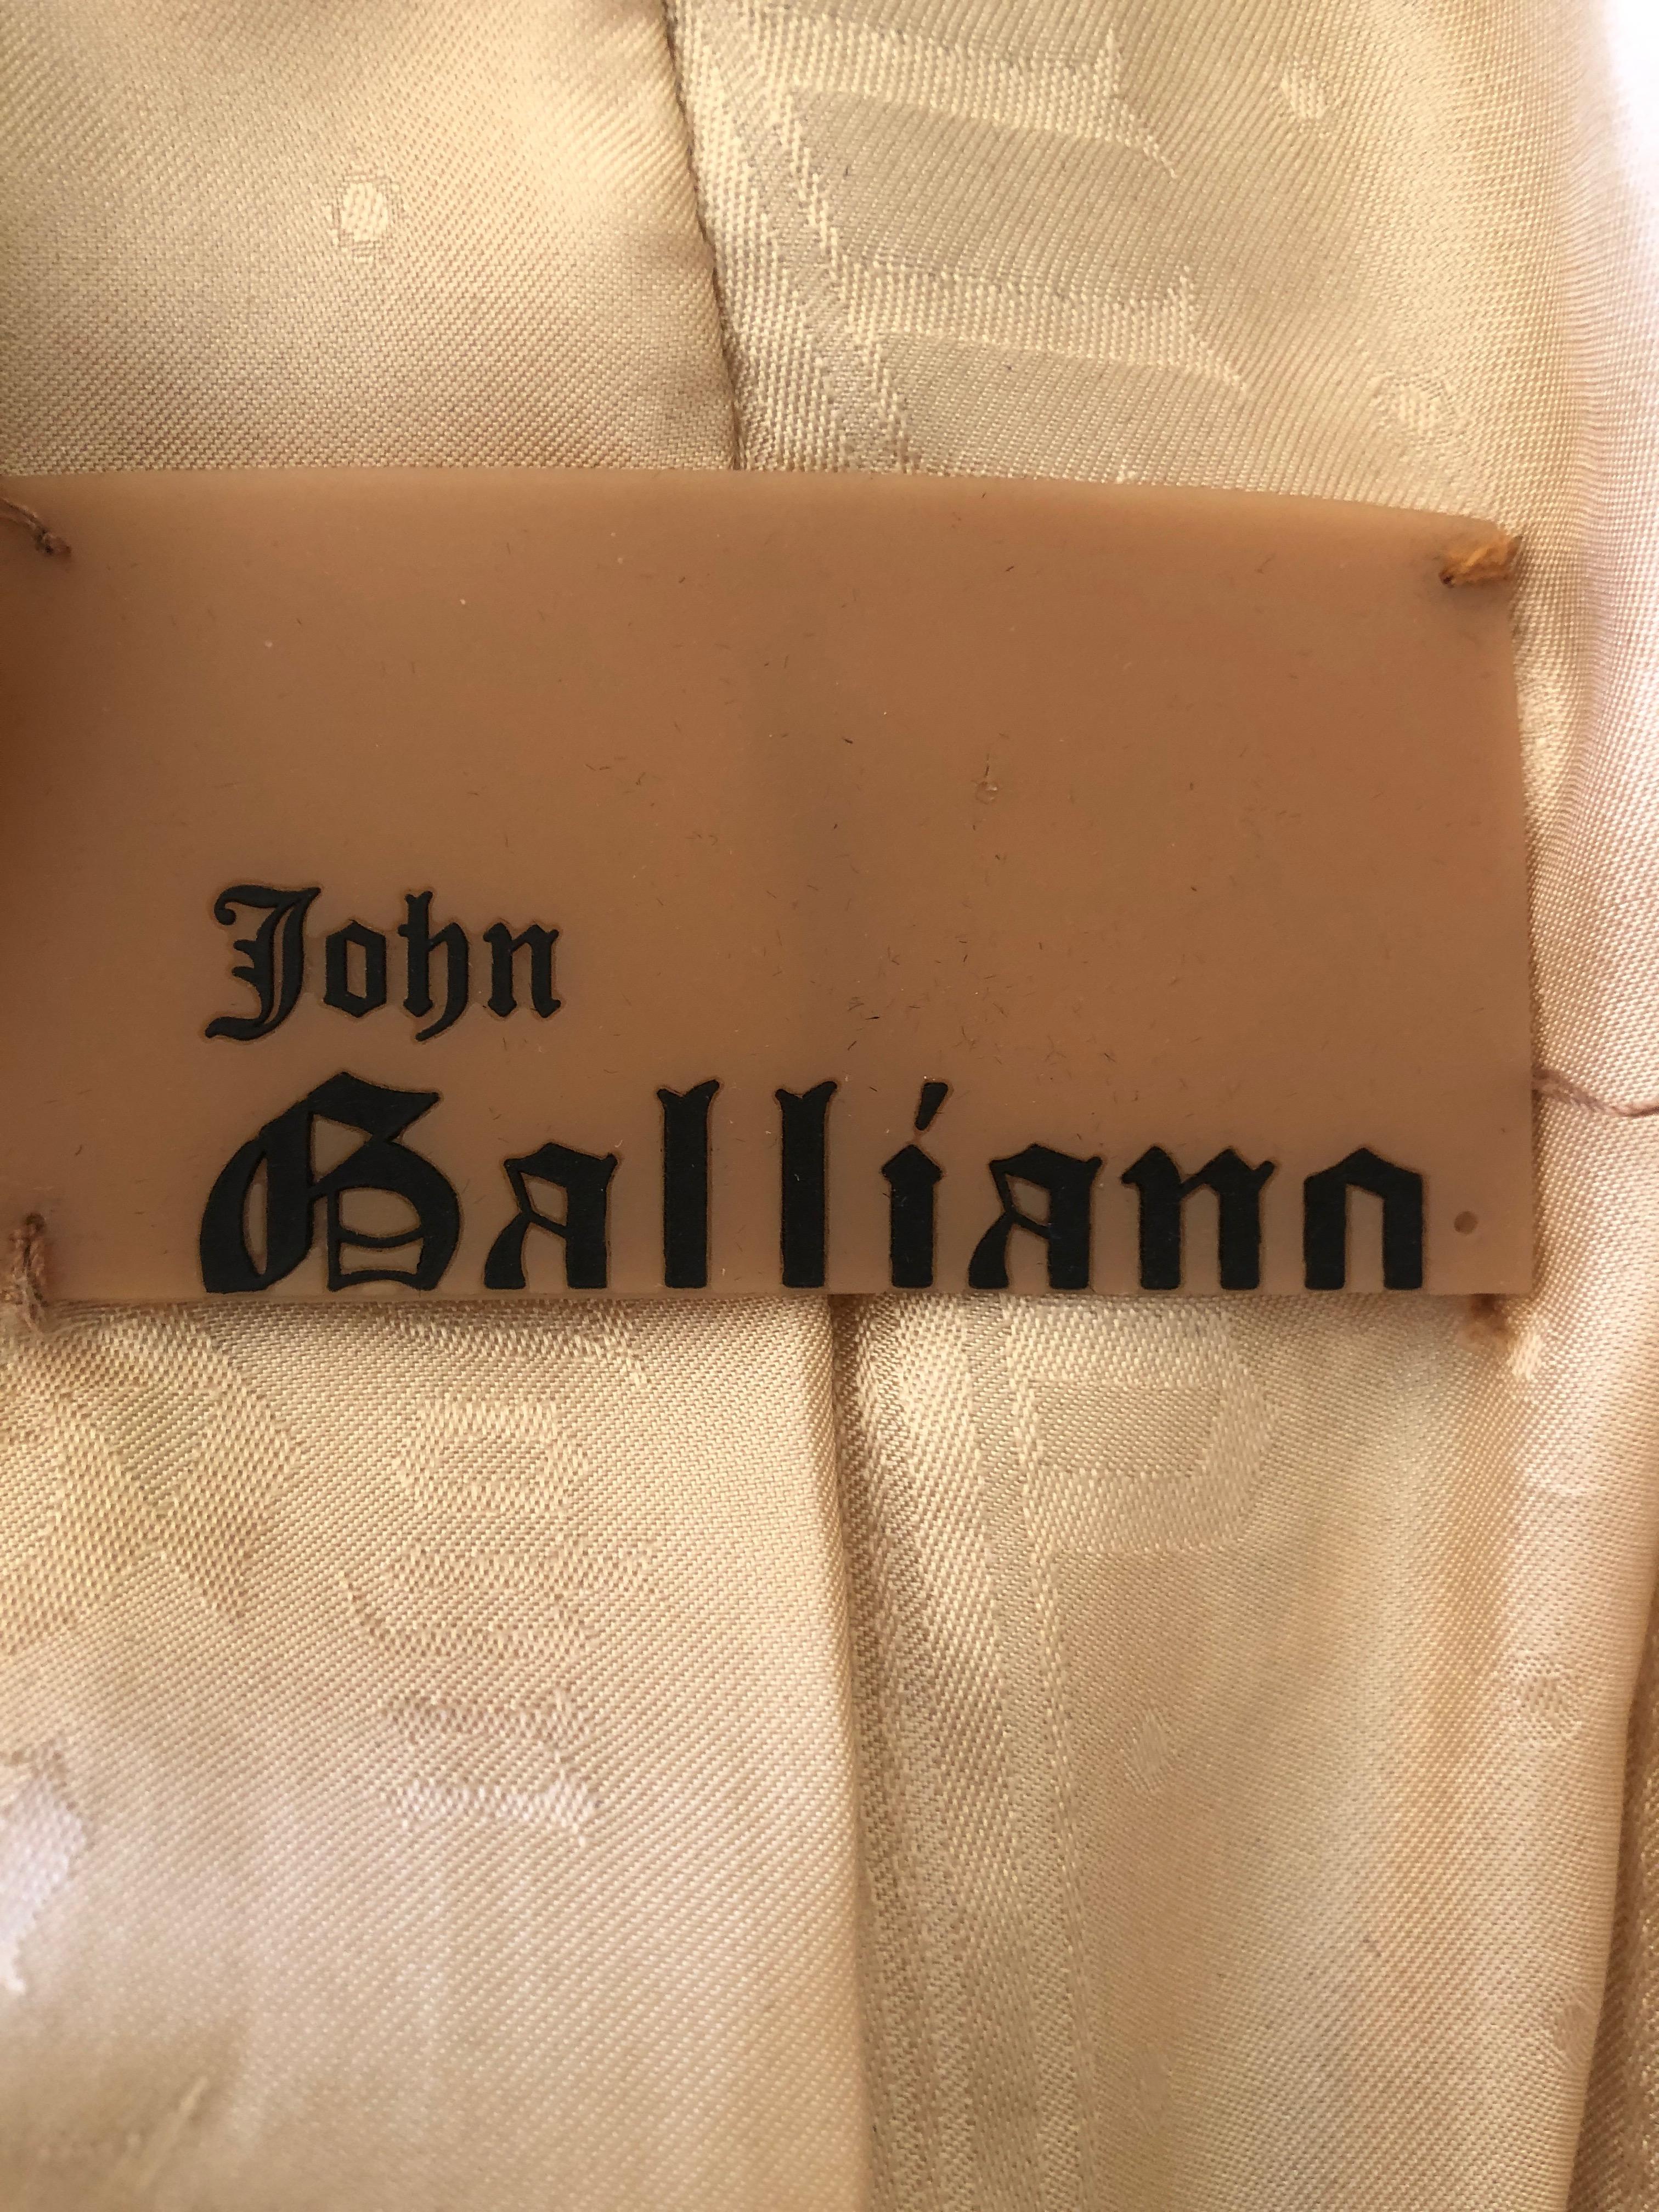 John Galliano Vintage Buff Suede Jacket with Metalwork Embroidery Details im Angebot 6